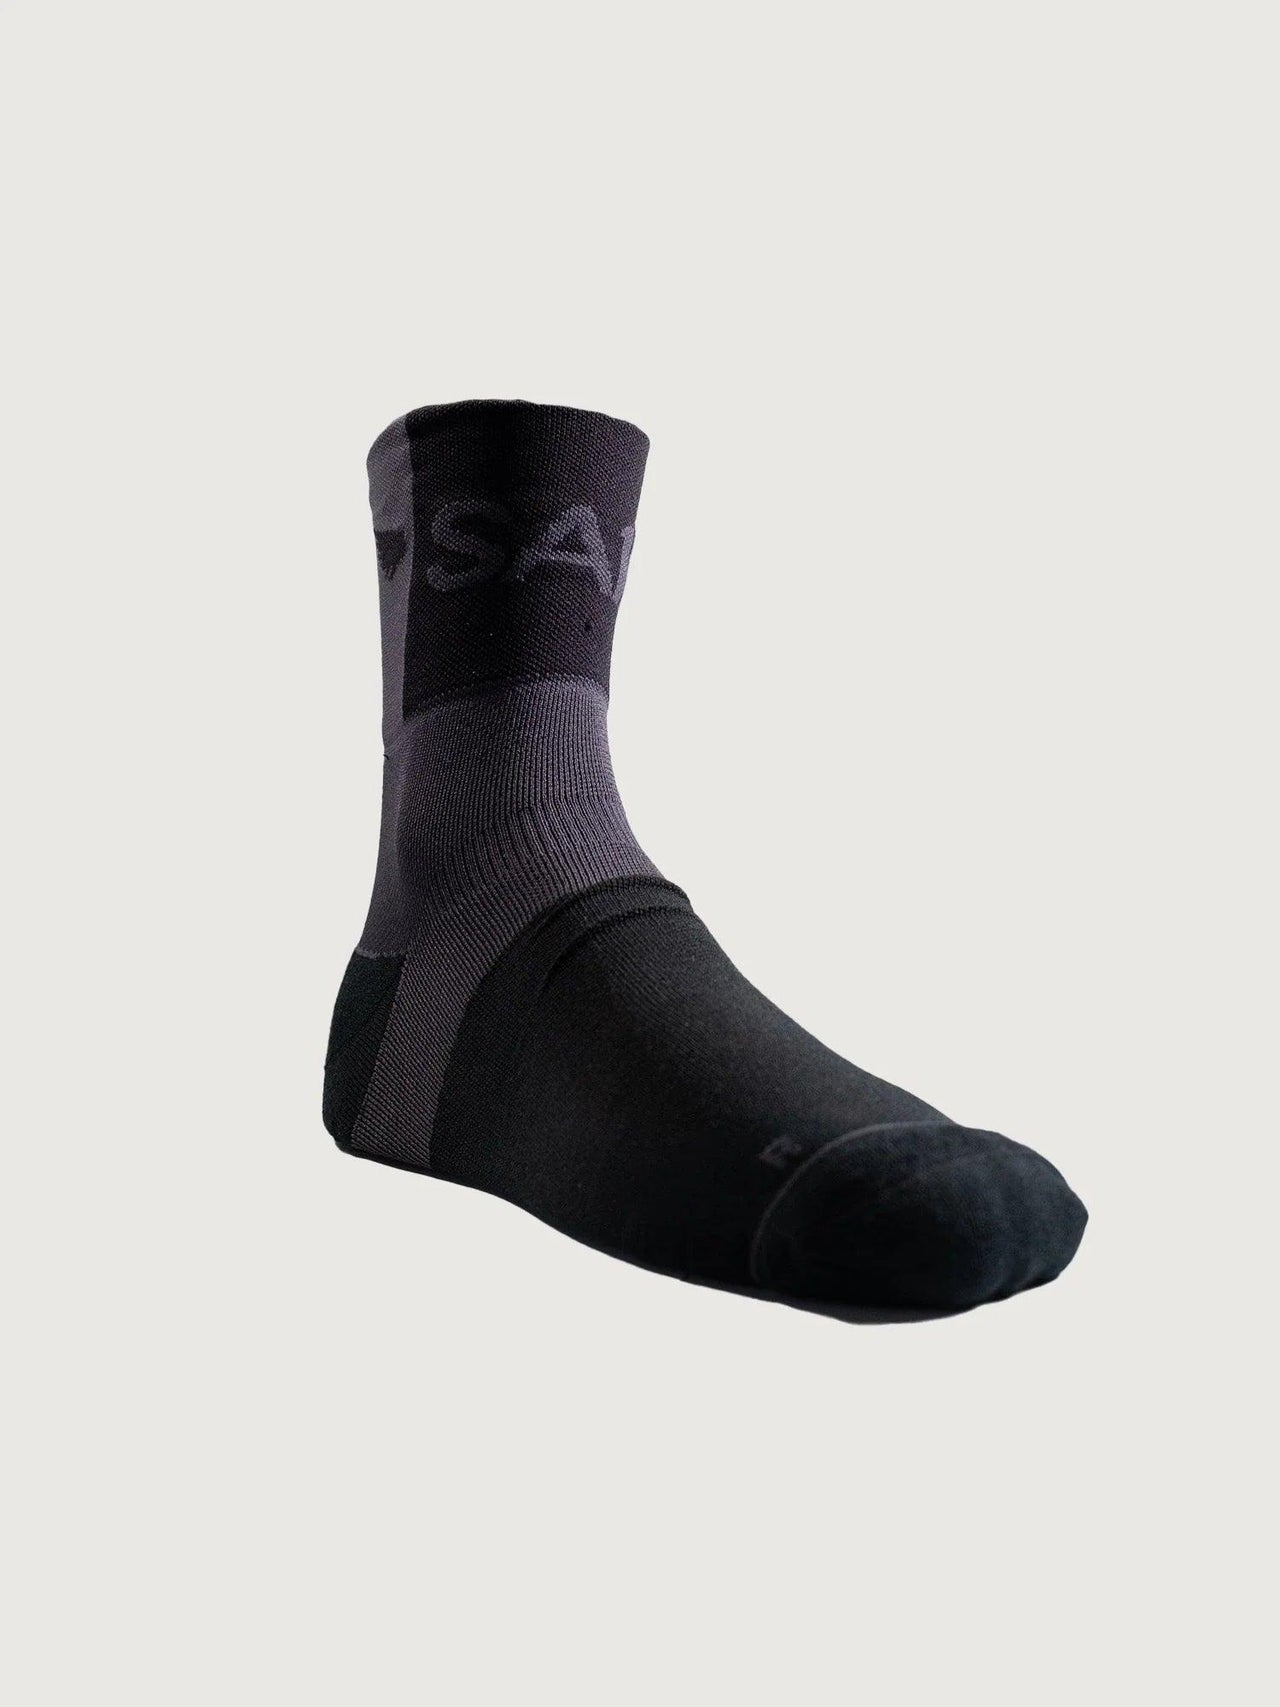 2XU COMPRESSION SOCKS FOR RECOVERY - Mike's Bike Shop